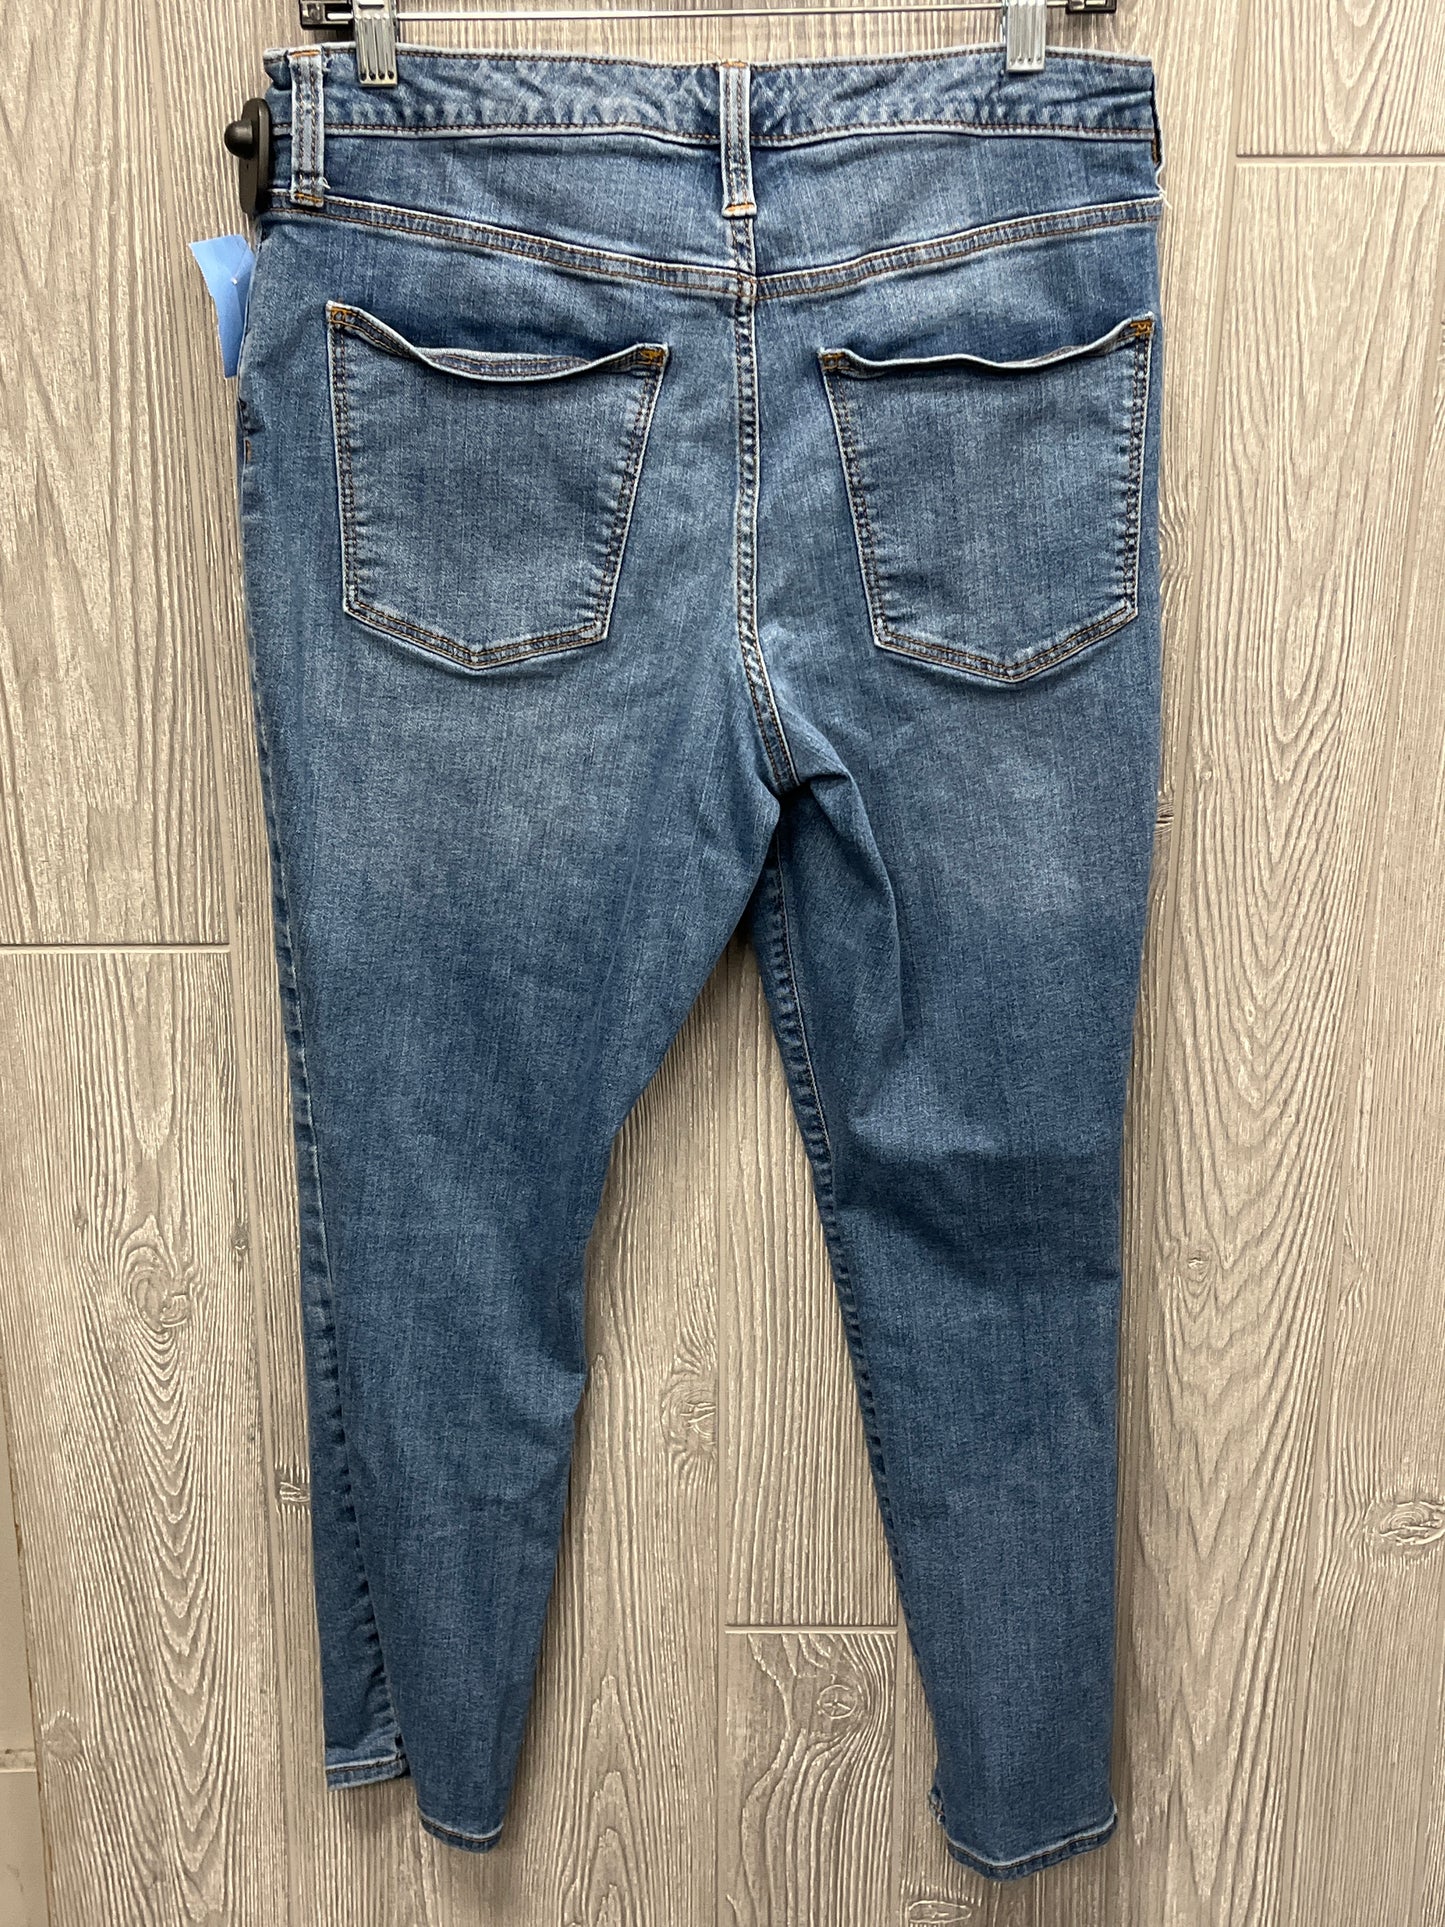 Jeans Skinny By Universal Thread  Size: 12